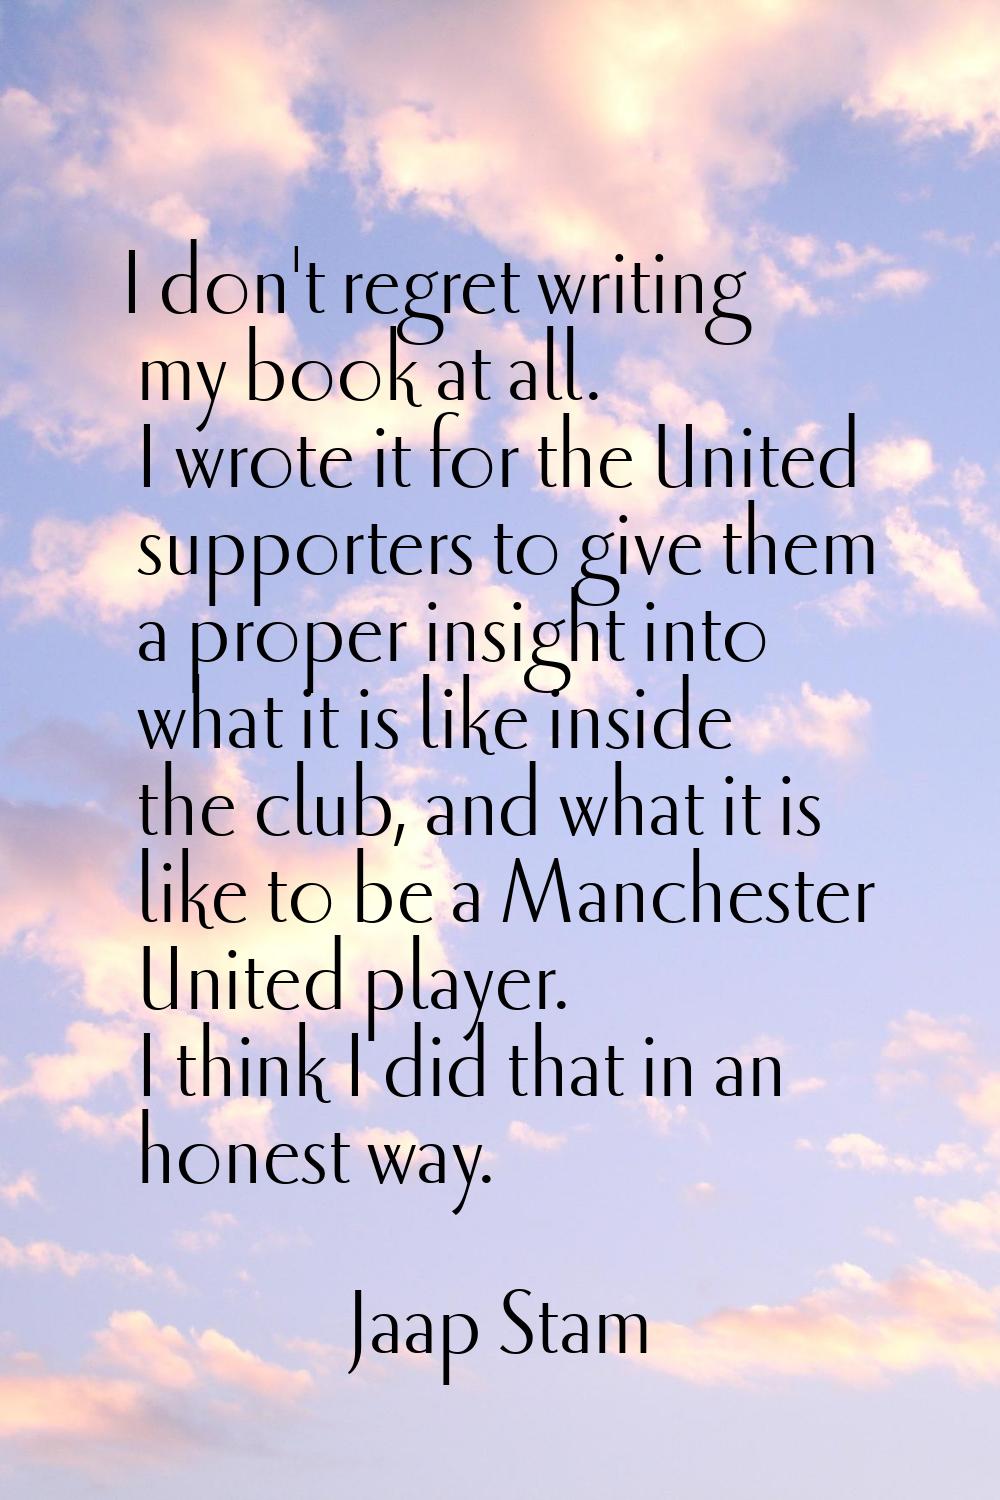 I don't regret writing my book at all. I wrote it for the United supporters to give them a proper i